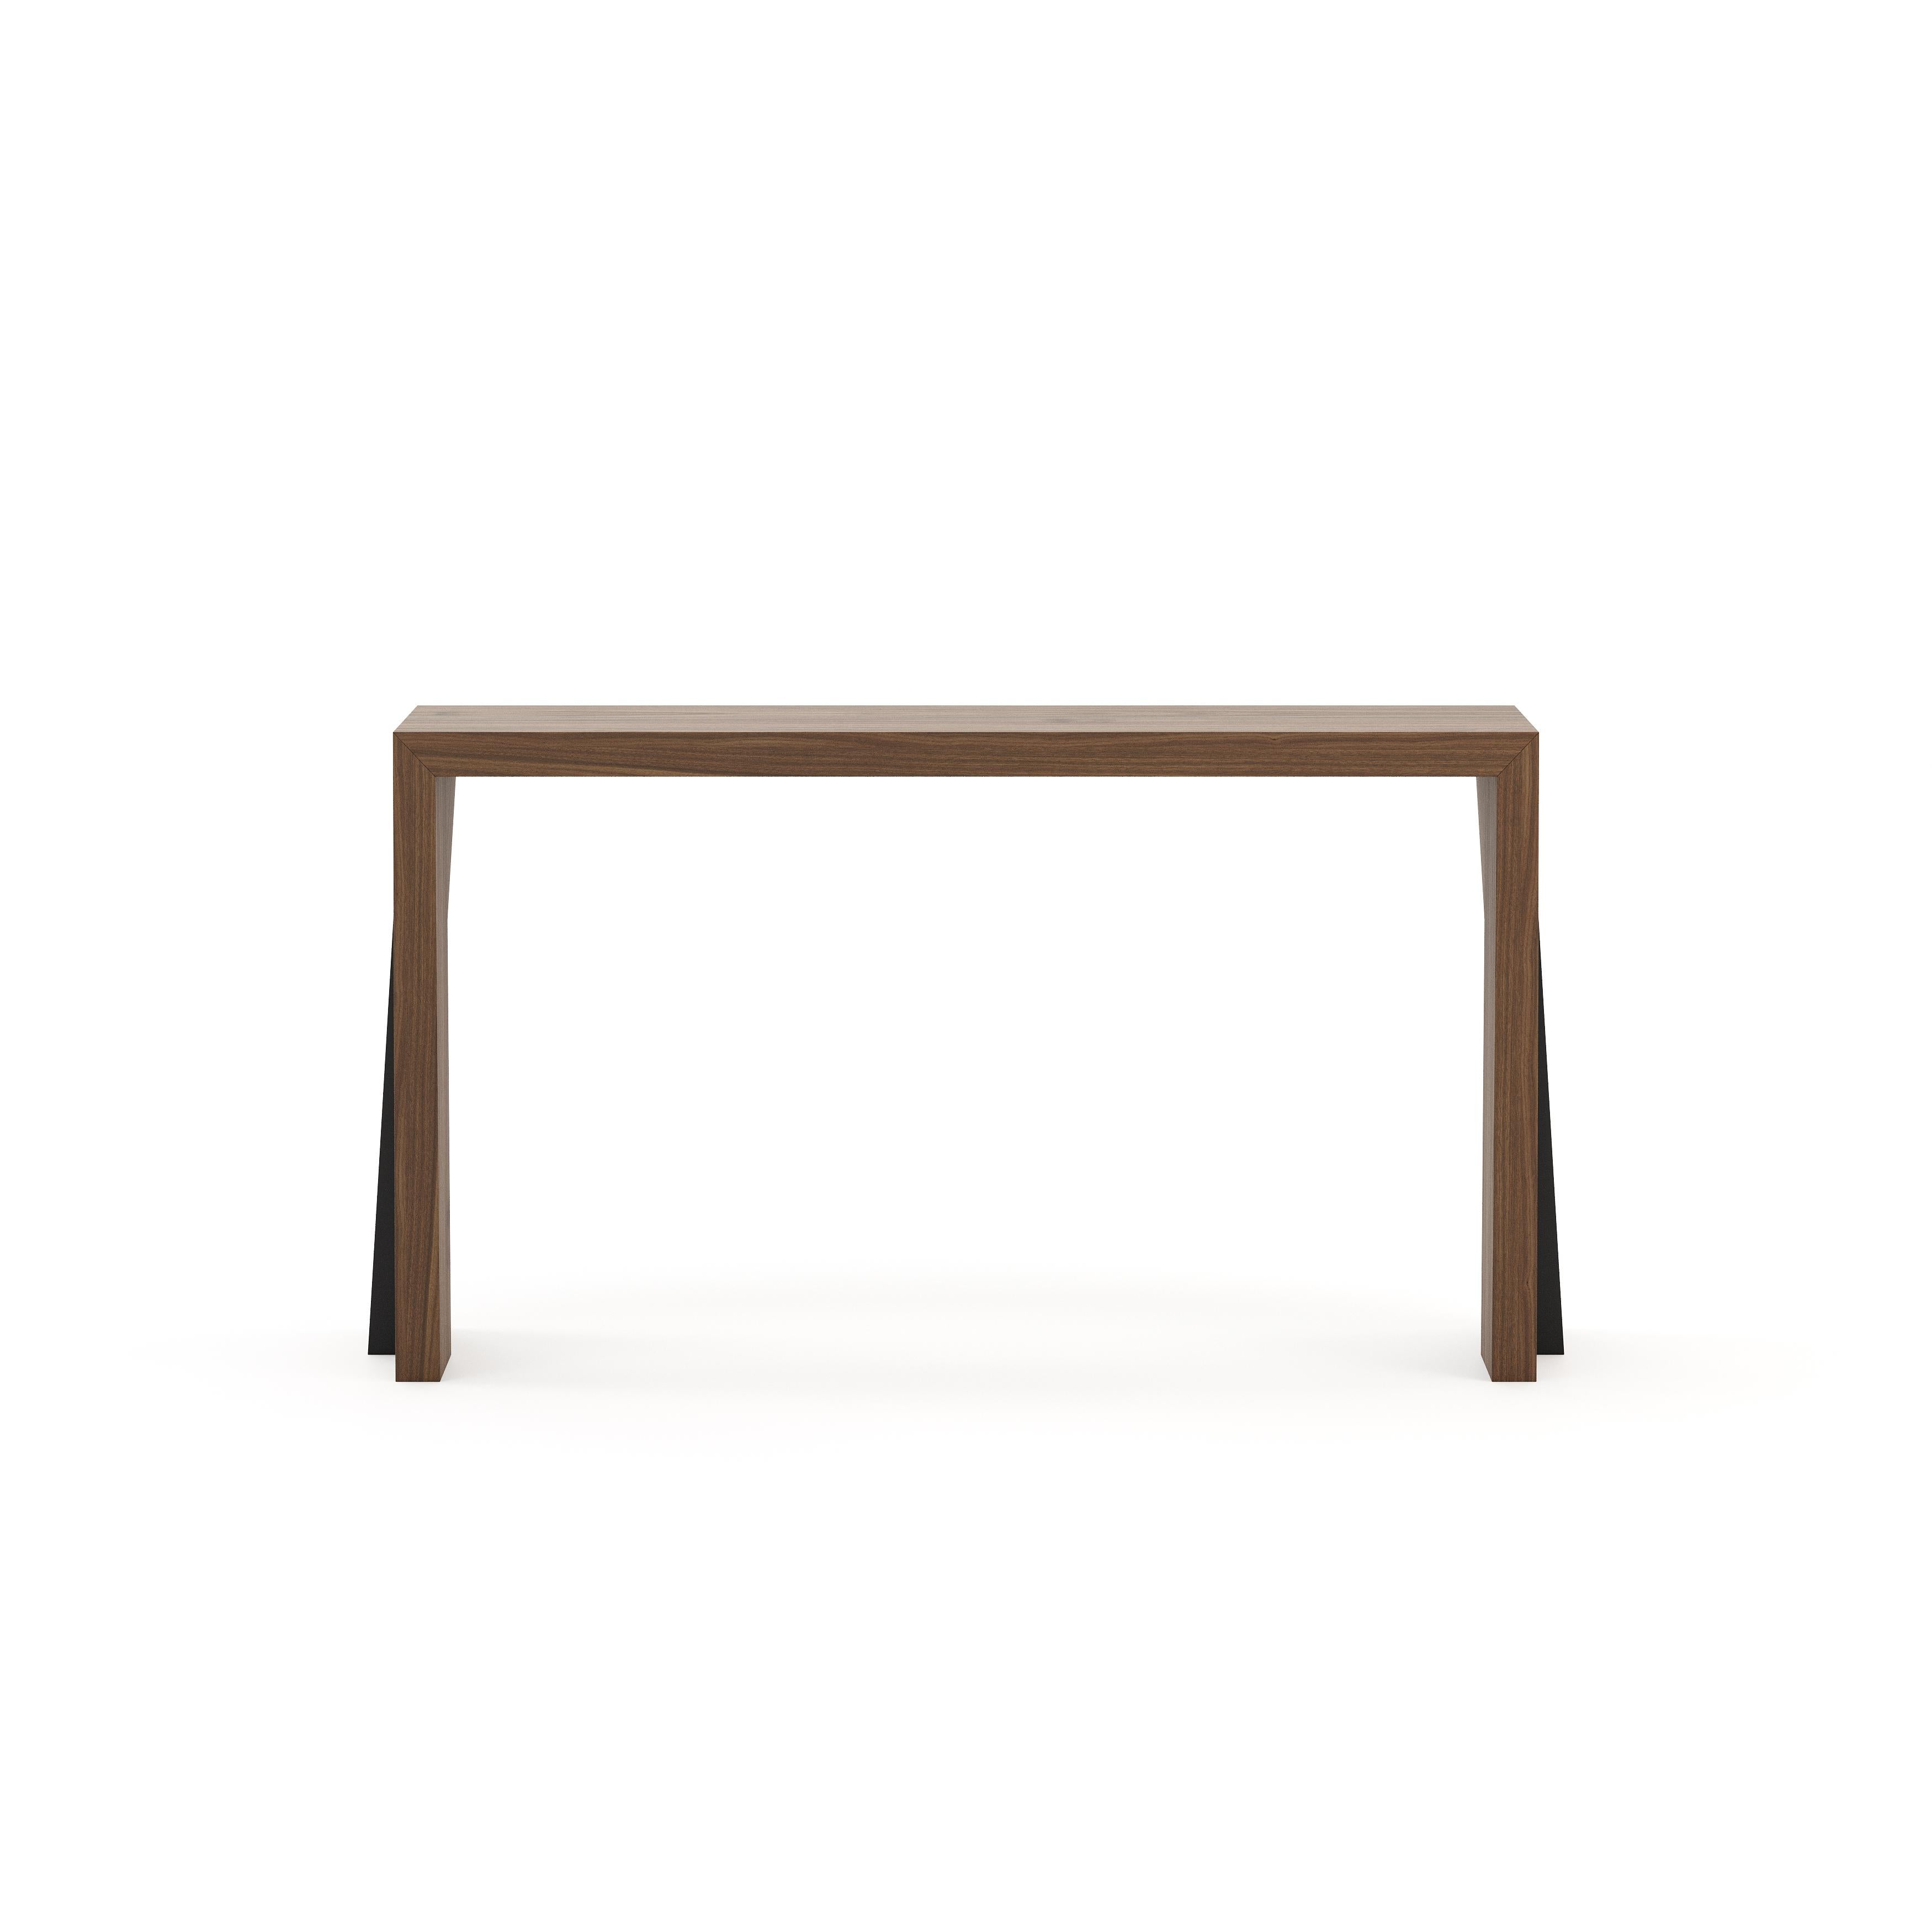 Portuguese 21st-century modern console table with drawer, with customisable wood For Sale